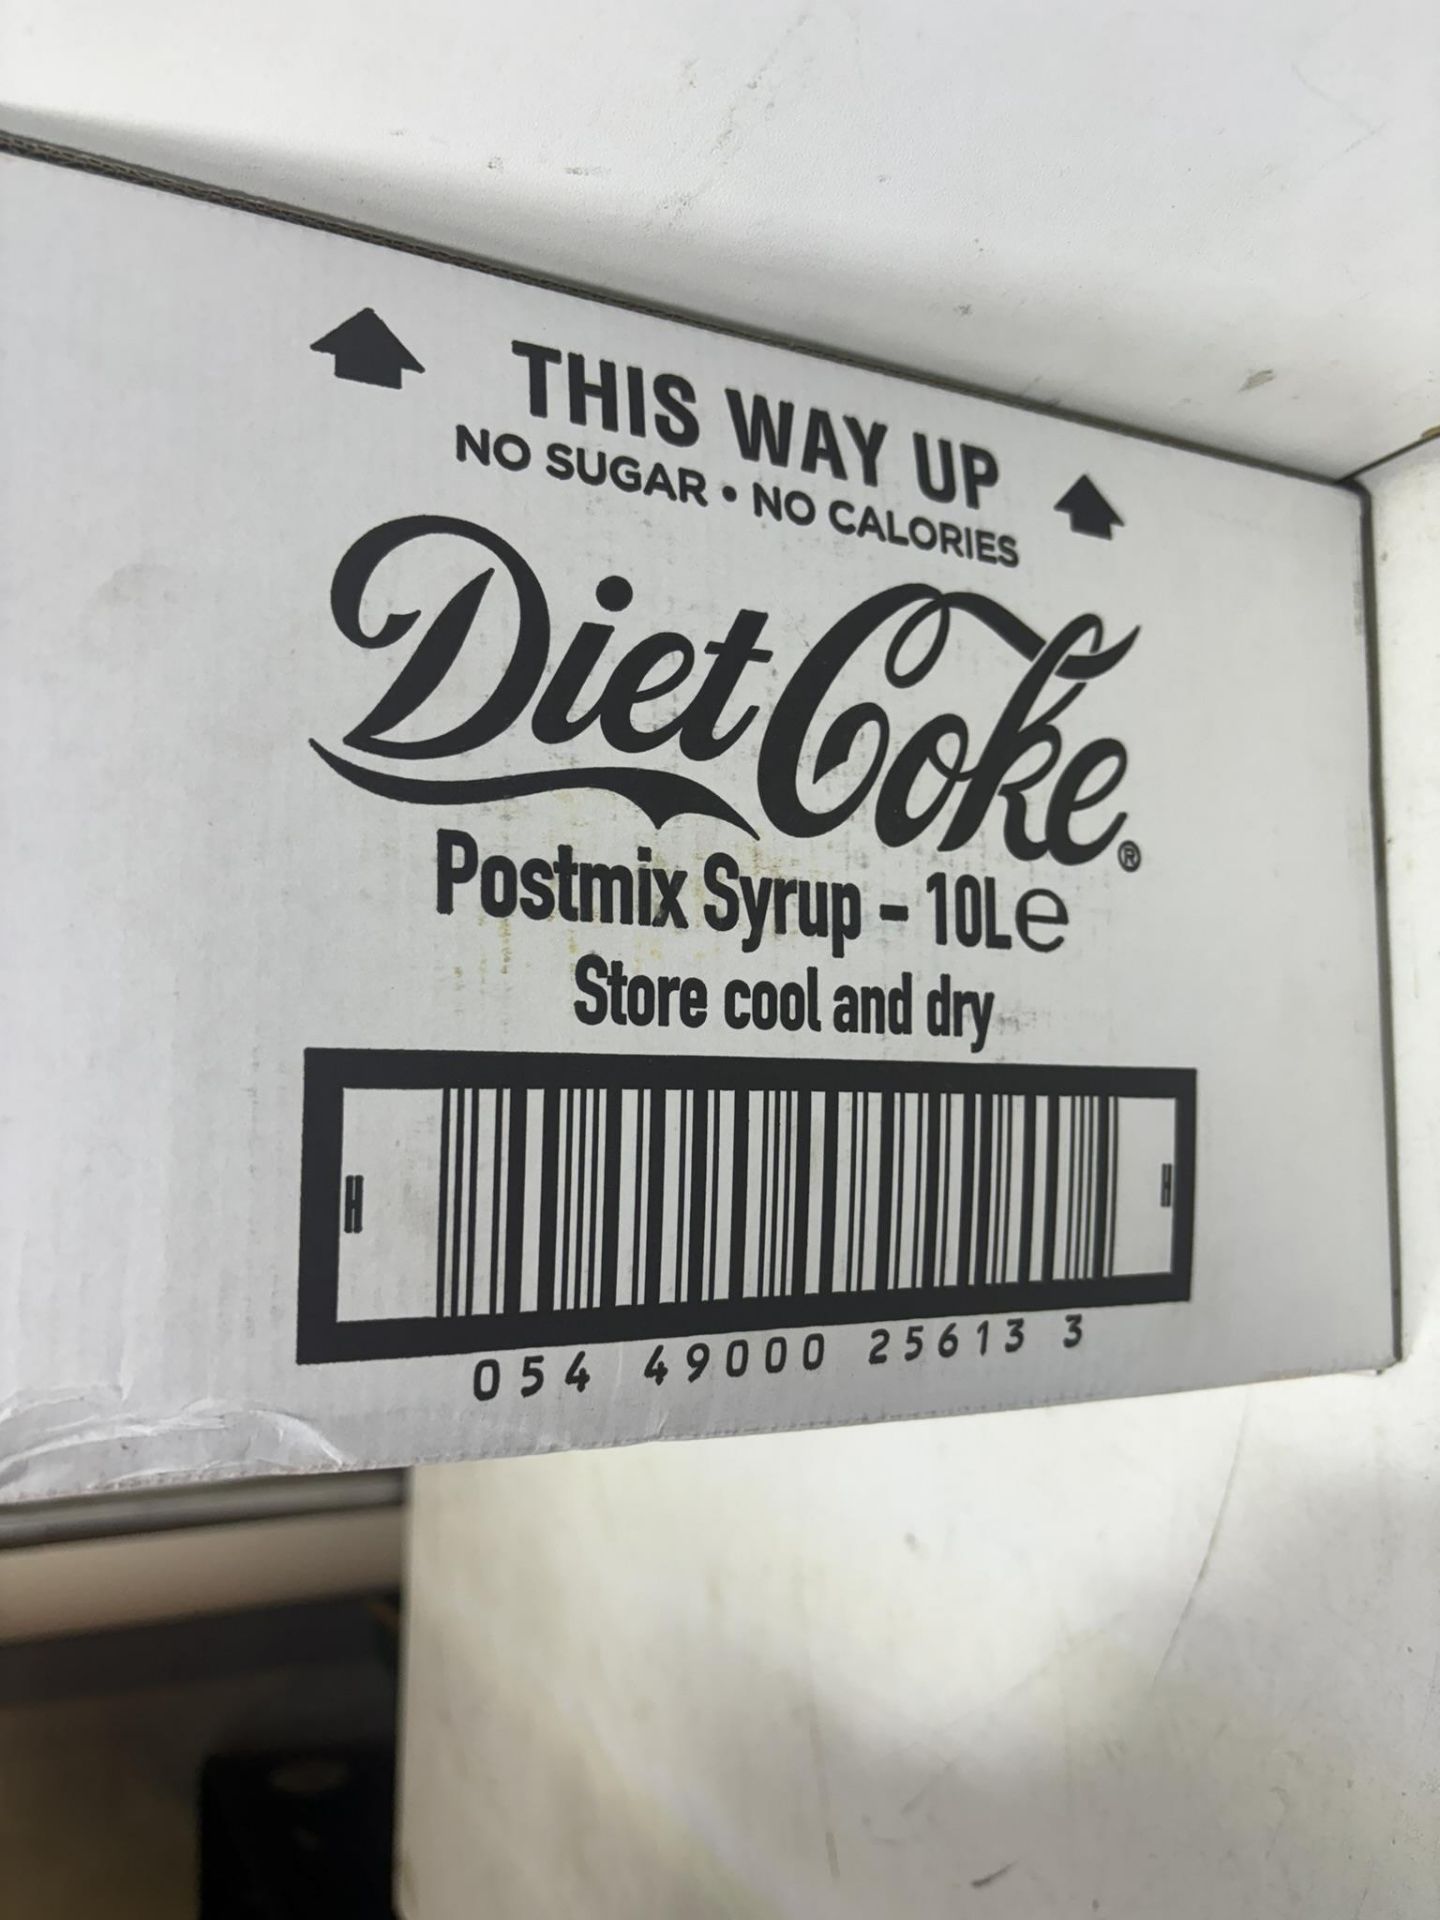 Diet Coke Postmix Syrup 10 Litre - Image 3 of 4